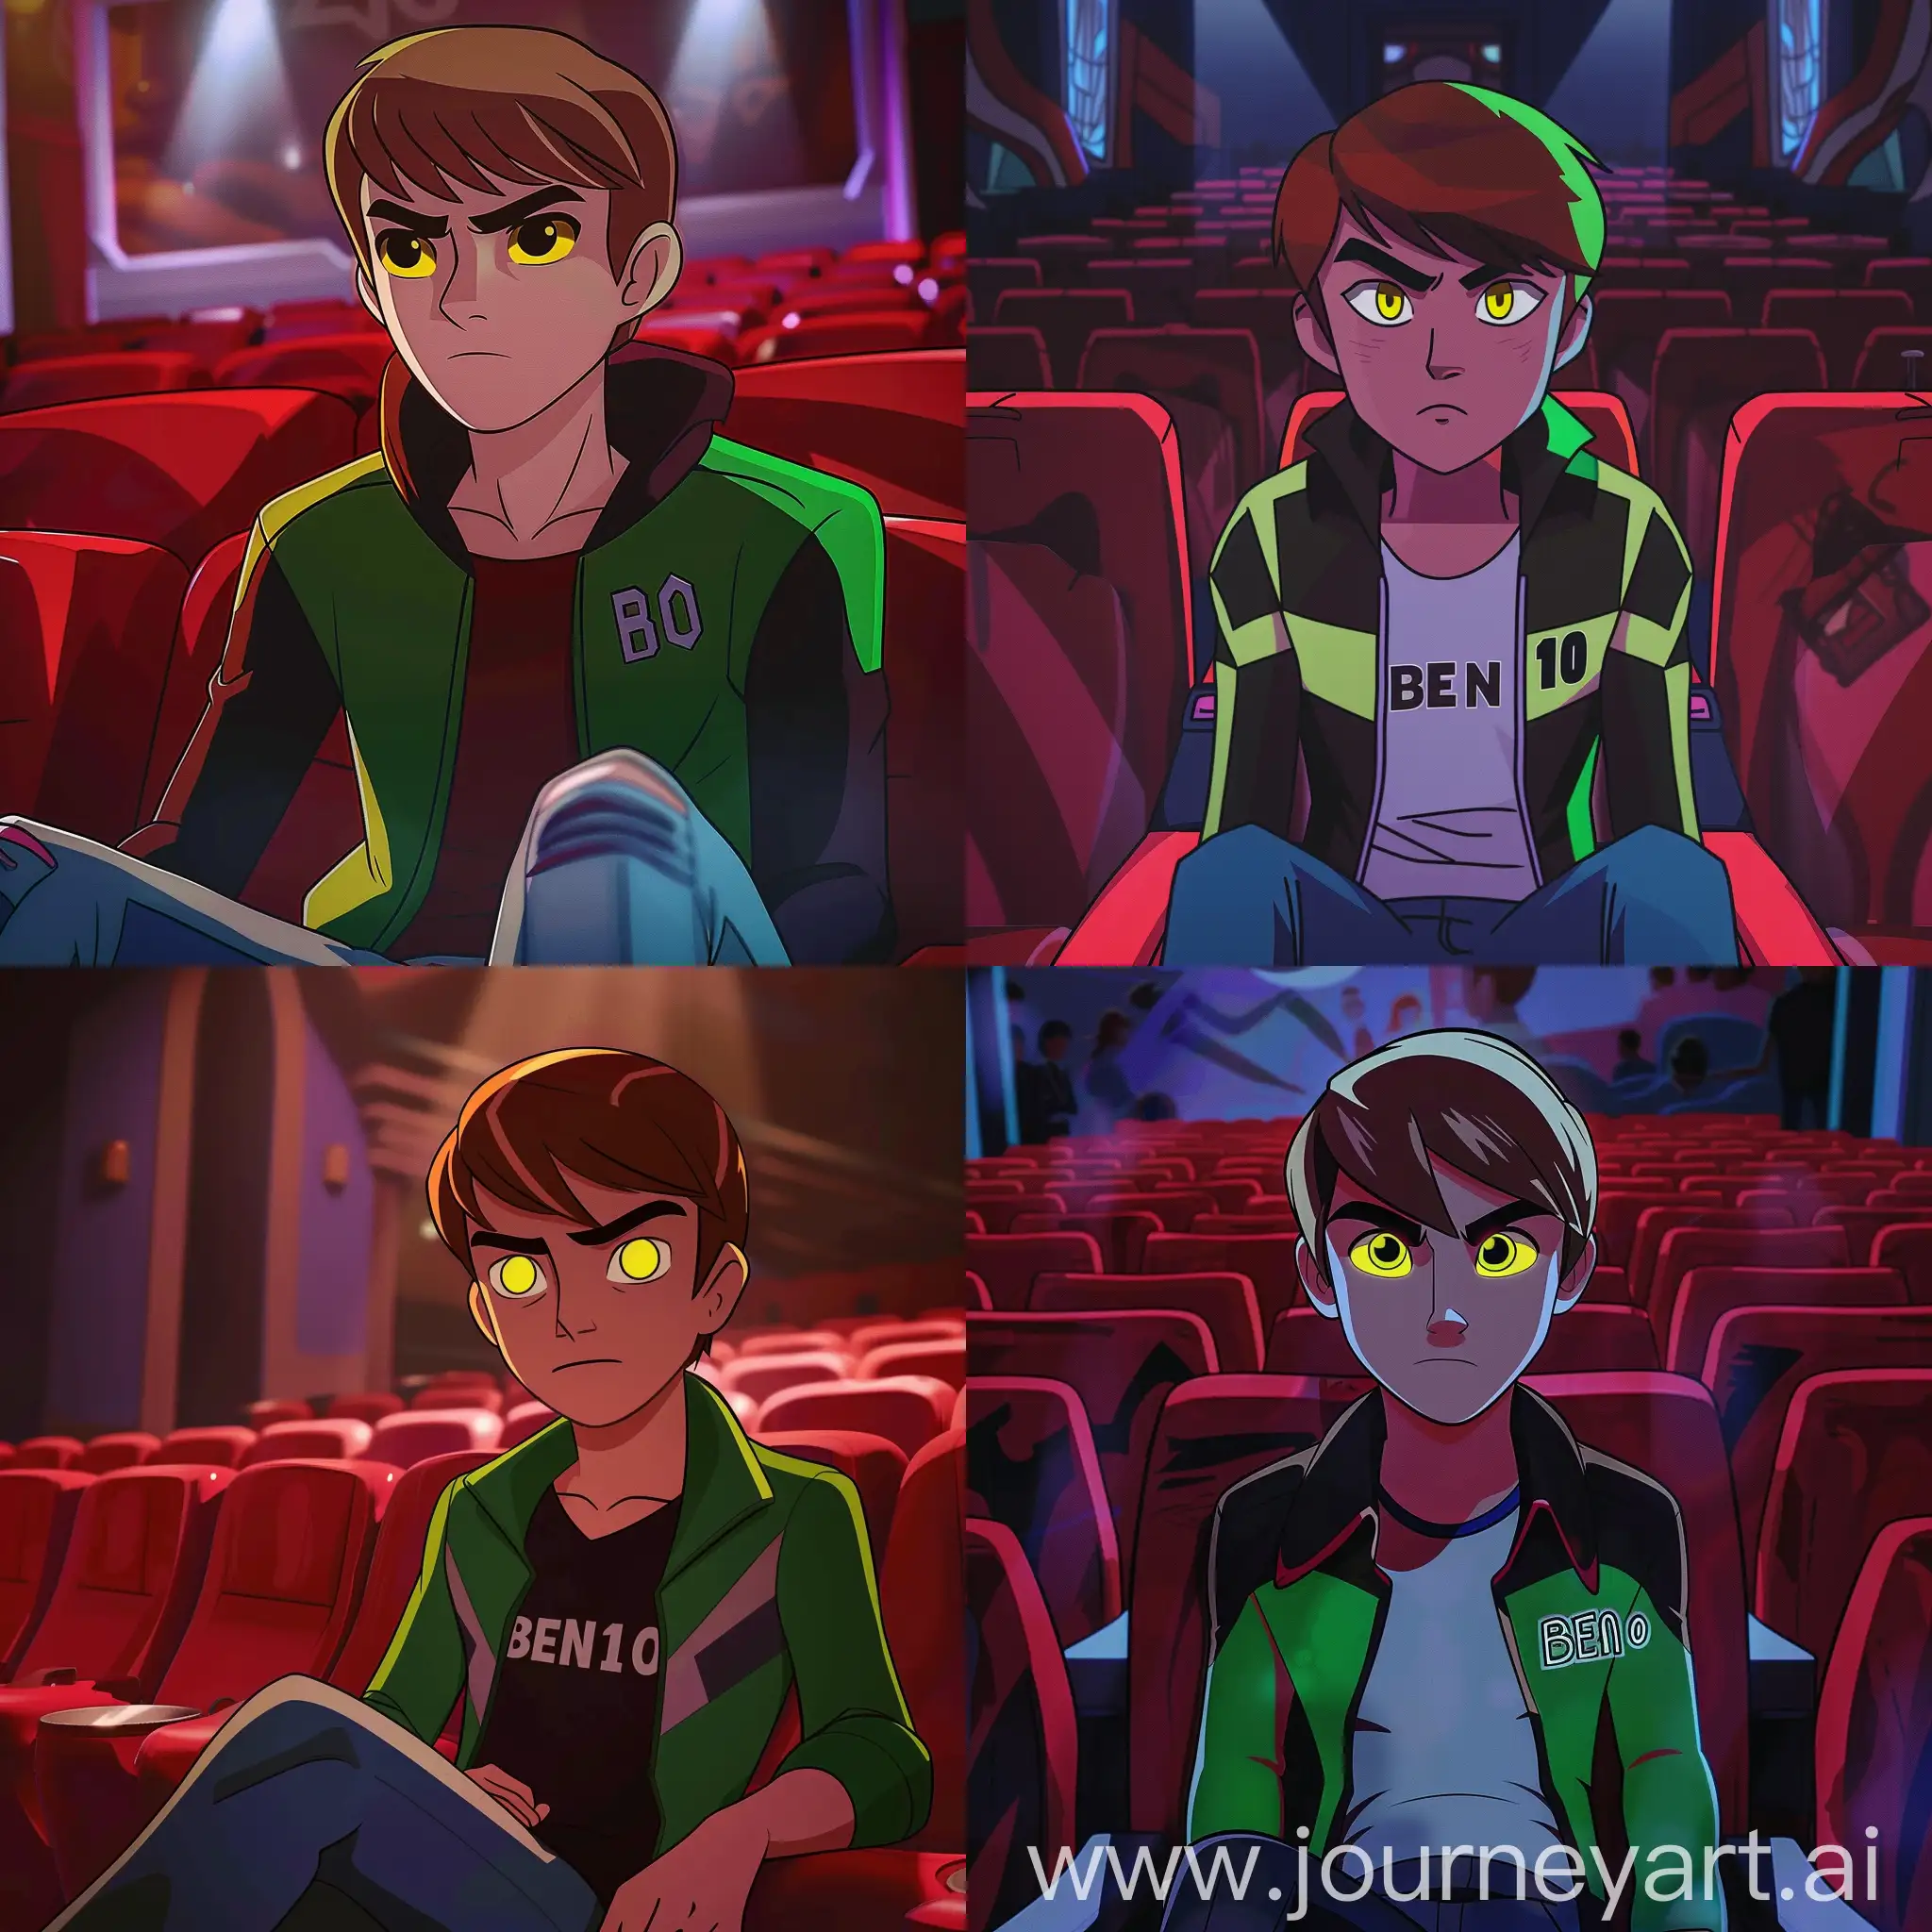 ben 10 sitting in the cinema, he has yellow eyes and "ben 10" is forged on his jacket, head and shoulders portrait, Instagram style, 2d illustrated handmade animation, 90s color grading --v 6 --cref https://cdn.discordapp.com/attachments/1215979386310889605/1216982884083040266/Picsart_24-03-08_22-57-05-471.jpg?ex=66025ea2&is=65efe9a2&hm=a3c3cd11df6f7a445bf1bb038220edc722e23bafed0277ddb6c2189fdd7132ea& <https://cdn.discordapp.com/attachments/1215979386310889605/1217016024080191539/dc0ea46ef4800245c6852fecdca3ec26.jpg?ex=66027d7f&is=65f0087f&hm=4dfeeb9c50c293884950e8ce0d8b37869a4a50faa0b9dc9468d263f56d640be5&> <https://cdn.discordapp.com/attachments/1215979386310889605/1217543896930979921/963161bc0b3a17bf0f87f2eb292a300b.jpg?ex=6604691d&is=65f1f41d&hm=c0744f206b1f27a600a9bc4c9ddf857e2c4e107fef91a80324ffa8af7fa18e06&> --cw 56